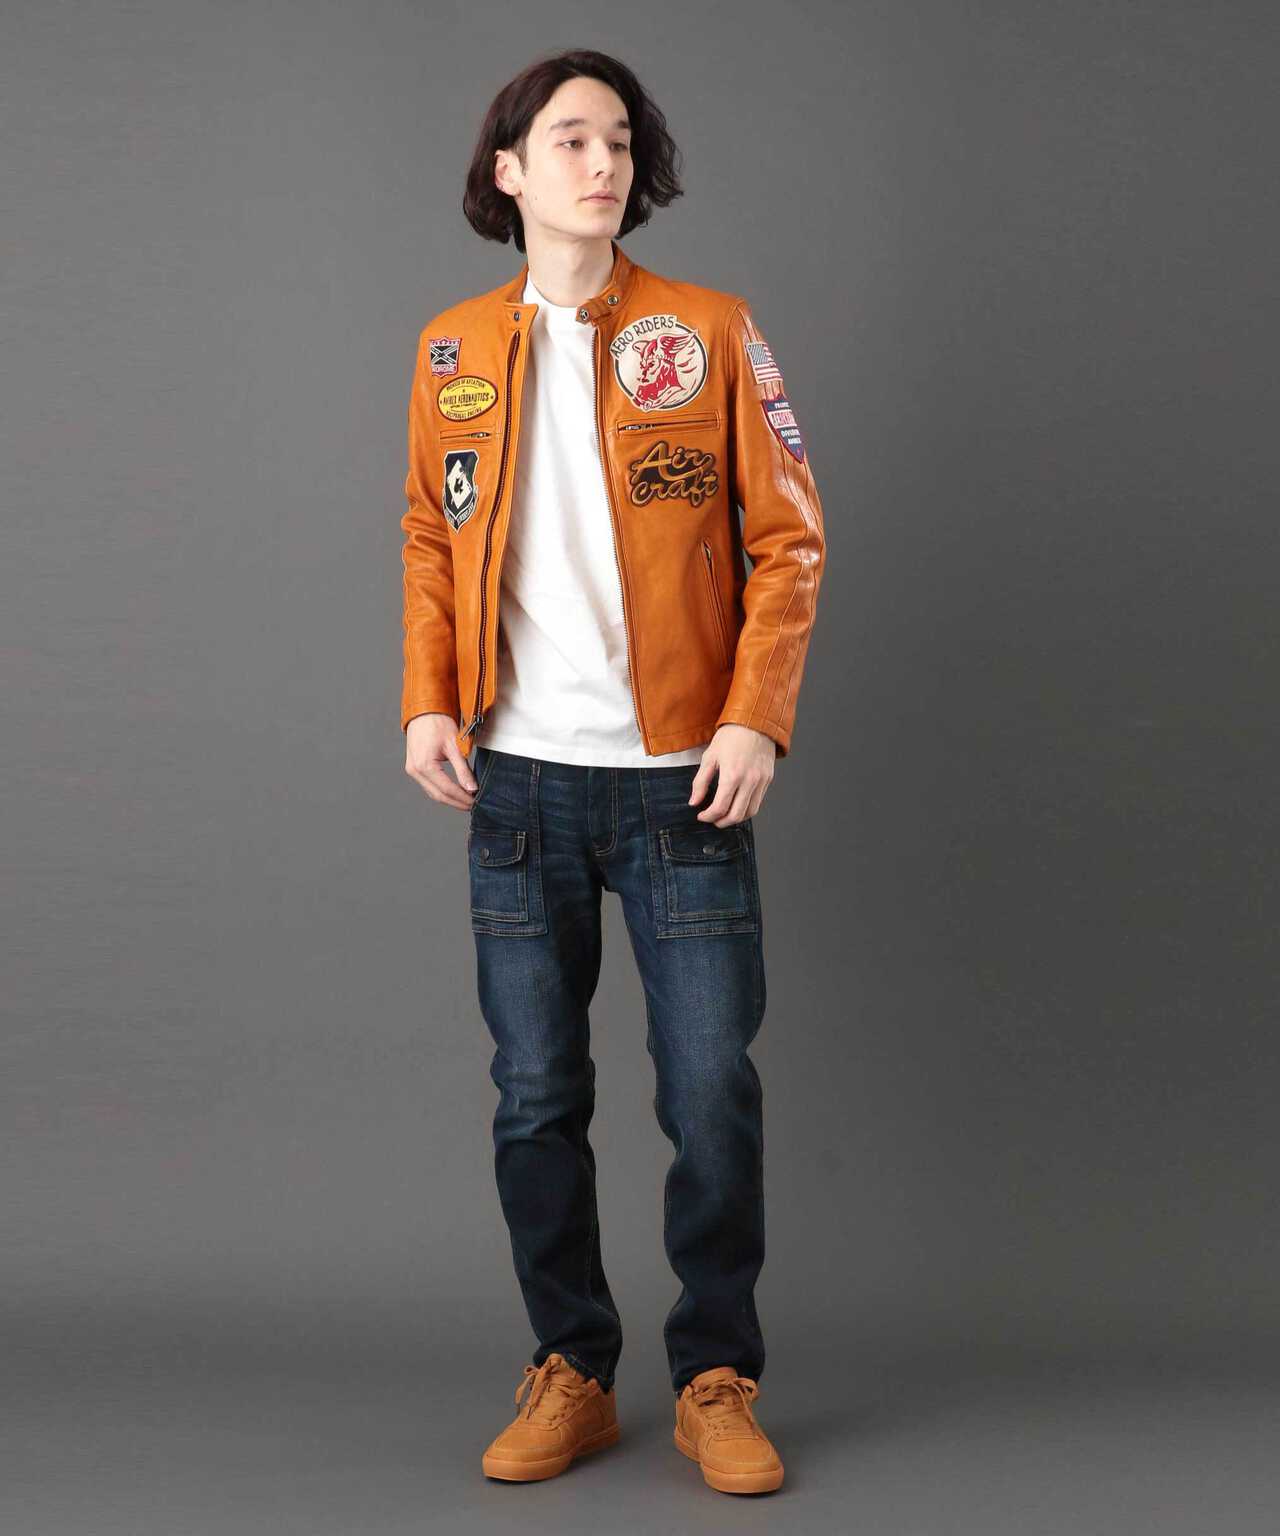 《REBUILD COLLECTION》パッチドライダース / PATCHED RIDERS JACKET